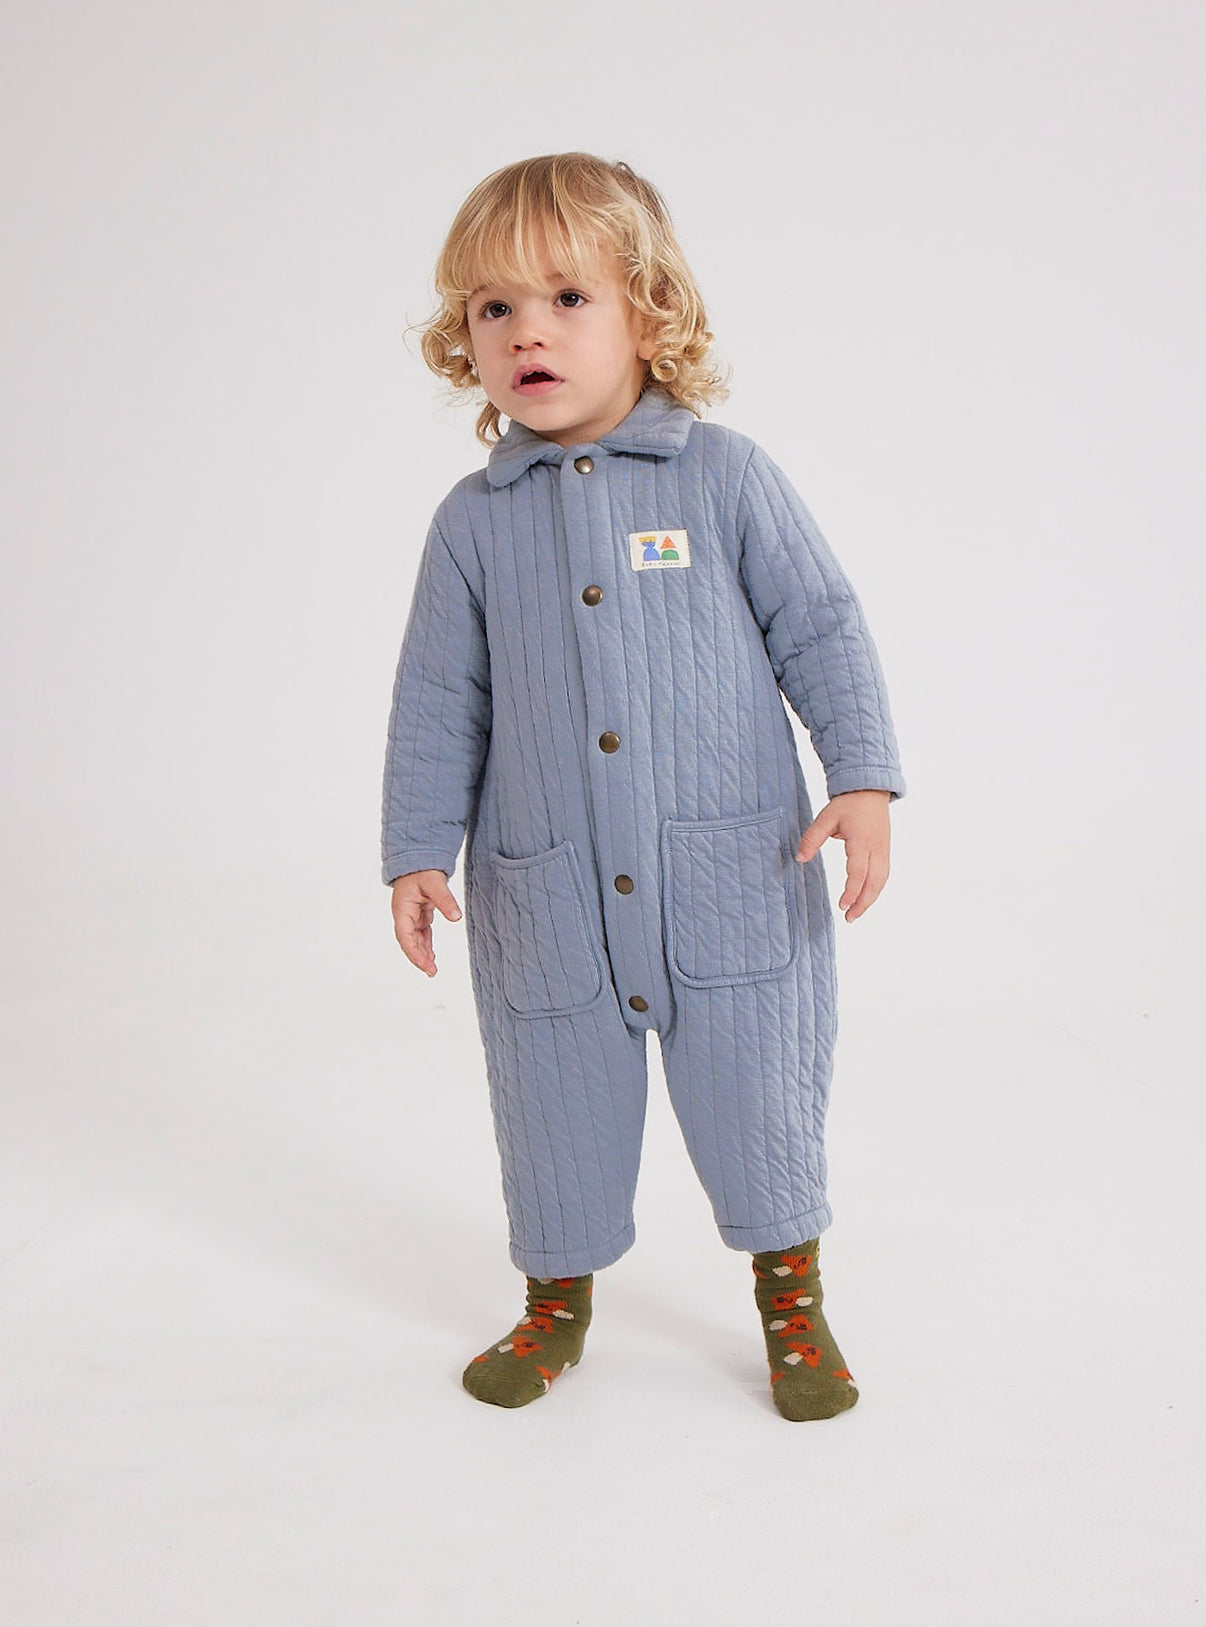 Bobo Choses Baby Quilted Overalls - 78% cotton 22% polyester blue overall. Designed with spread collar, front snap fastening, crotch snap fastening, patch and patch pocket. It has a relaxed fit. Made in Portugal.